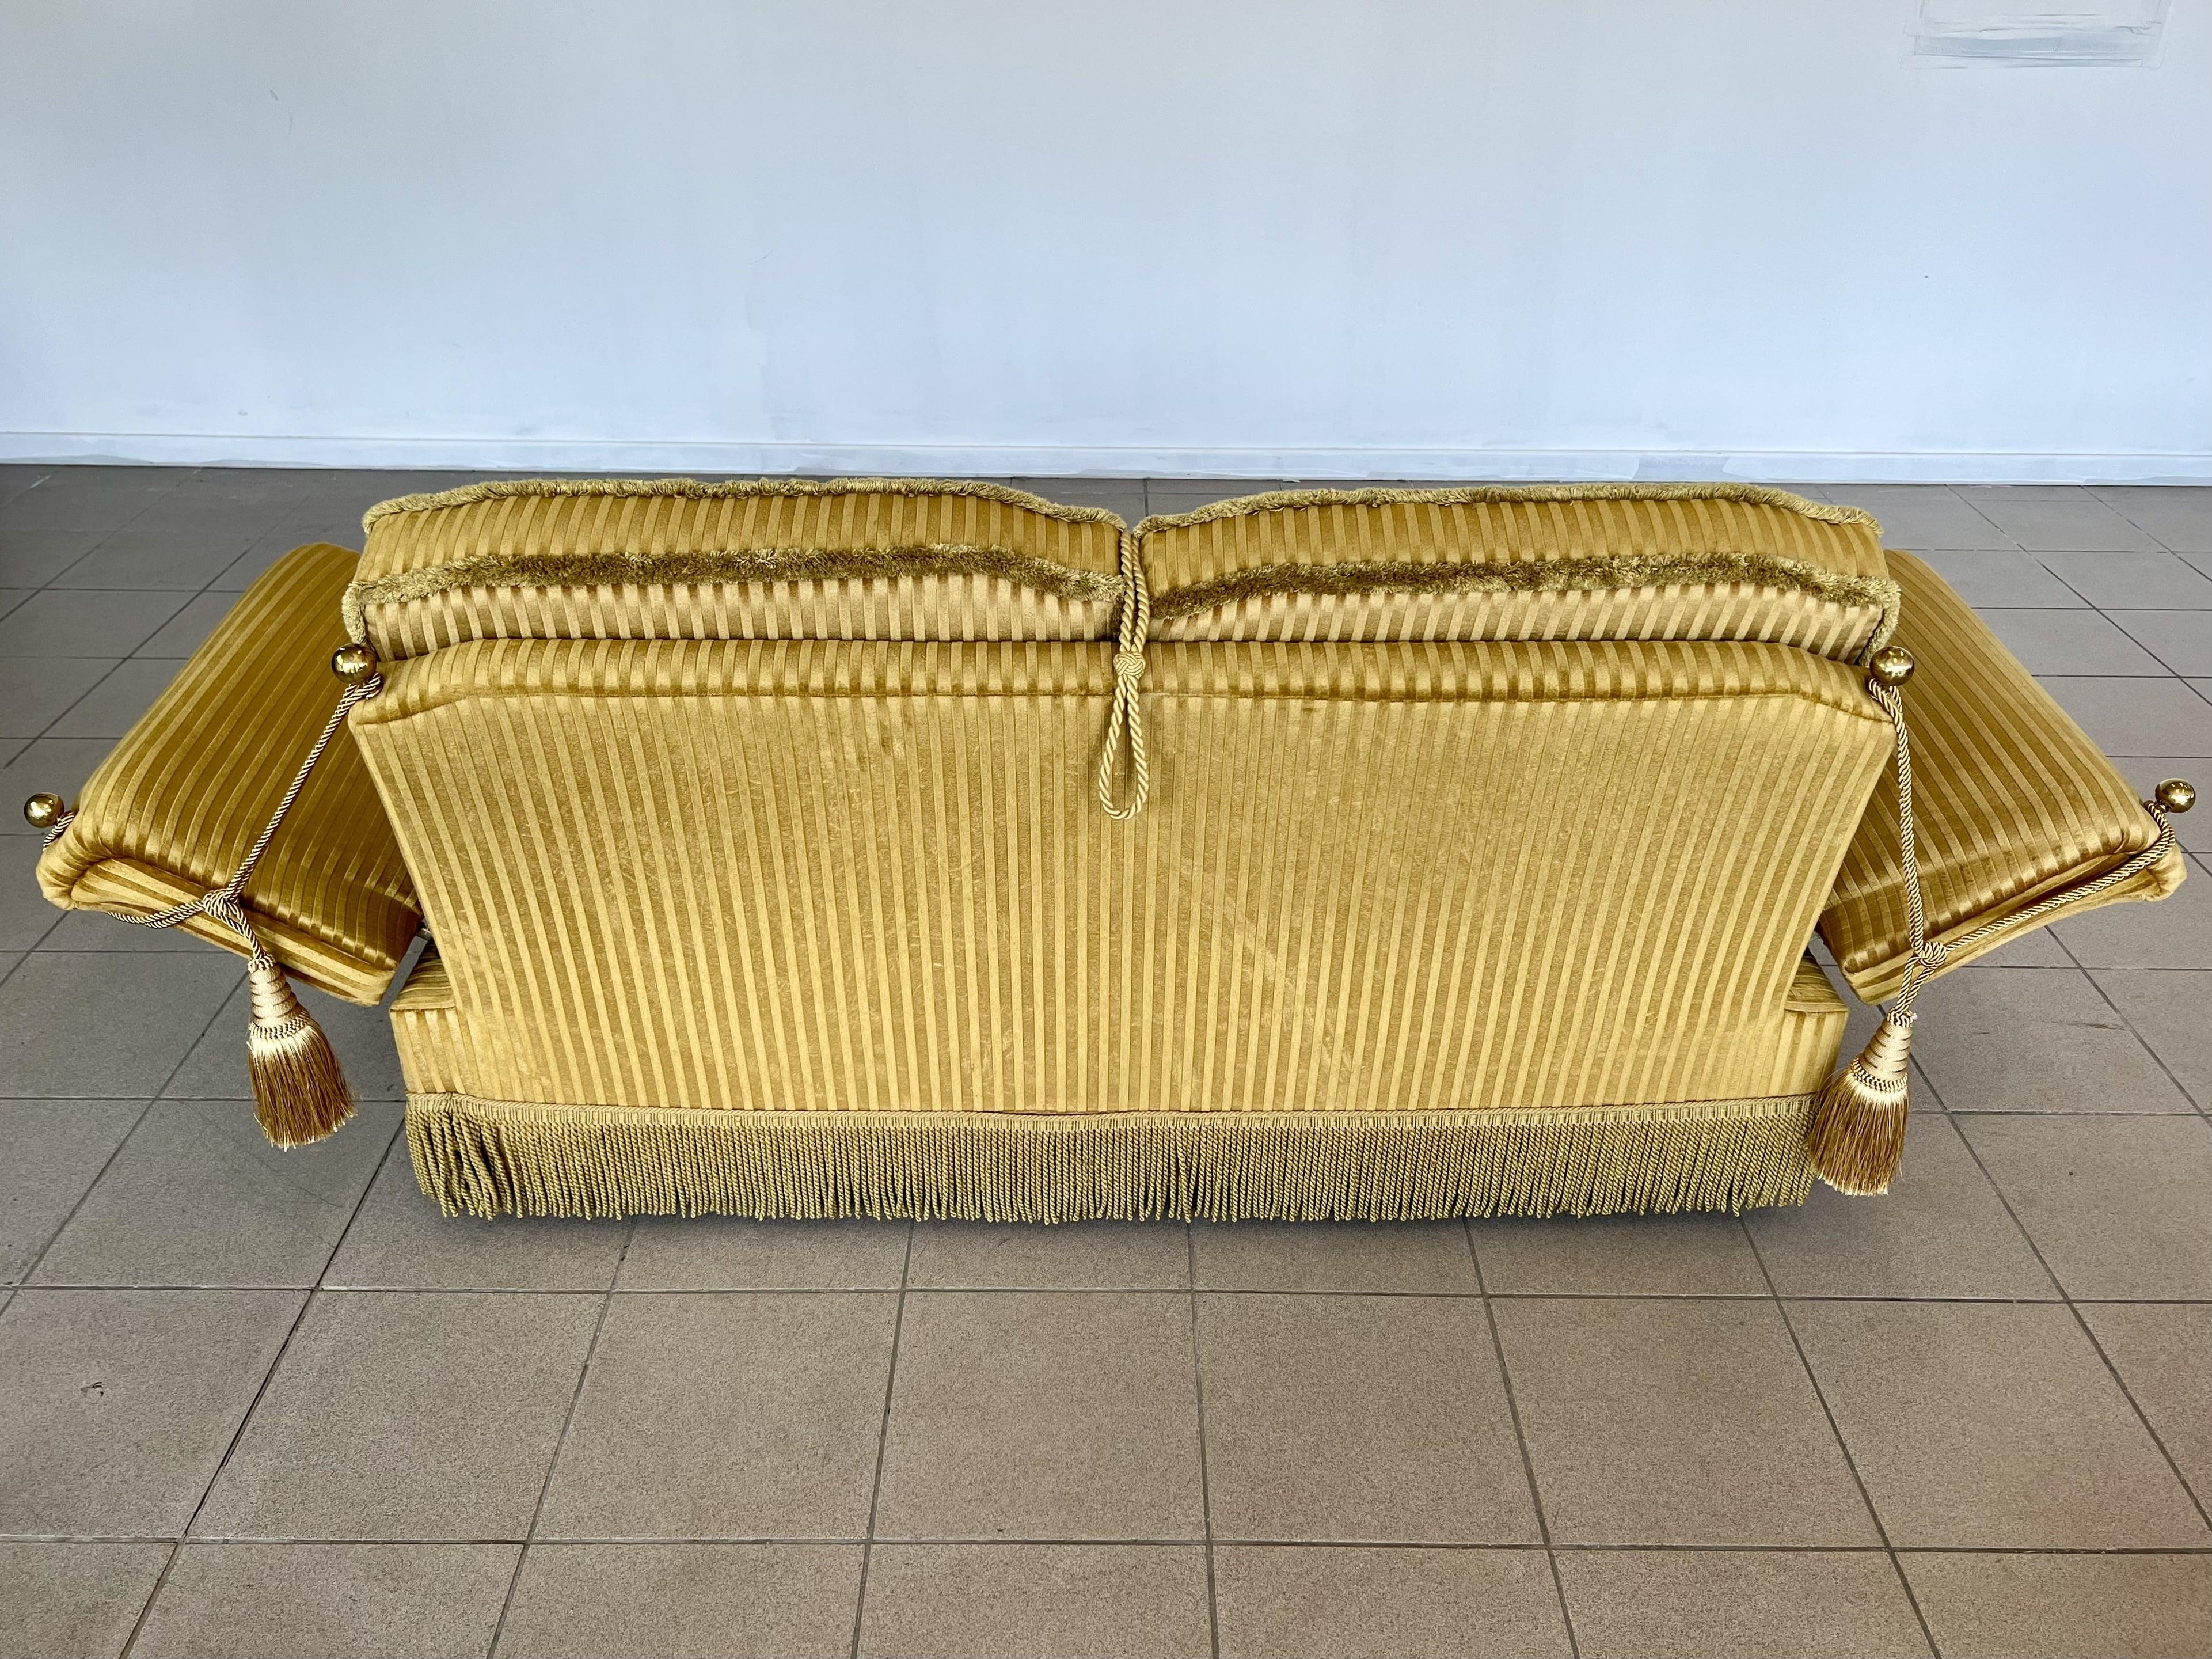 Vintage Art Deco Styled Adjustable Sofa Bed With Cushions and Fringes For Sale 7